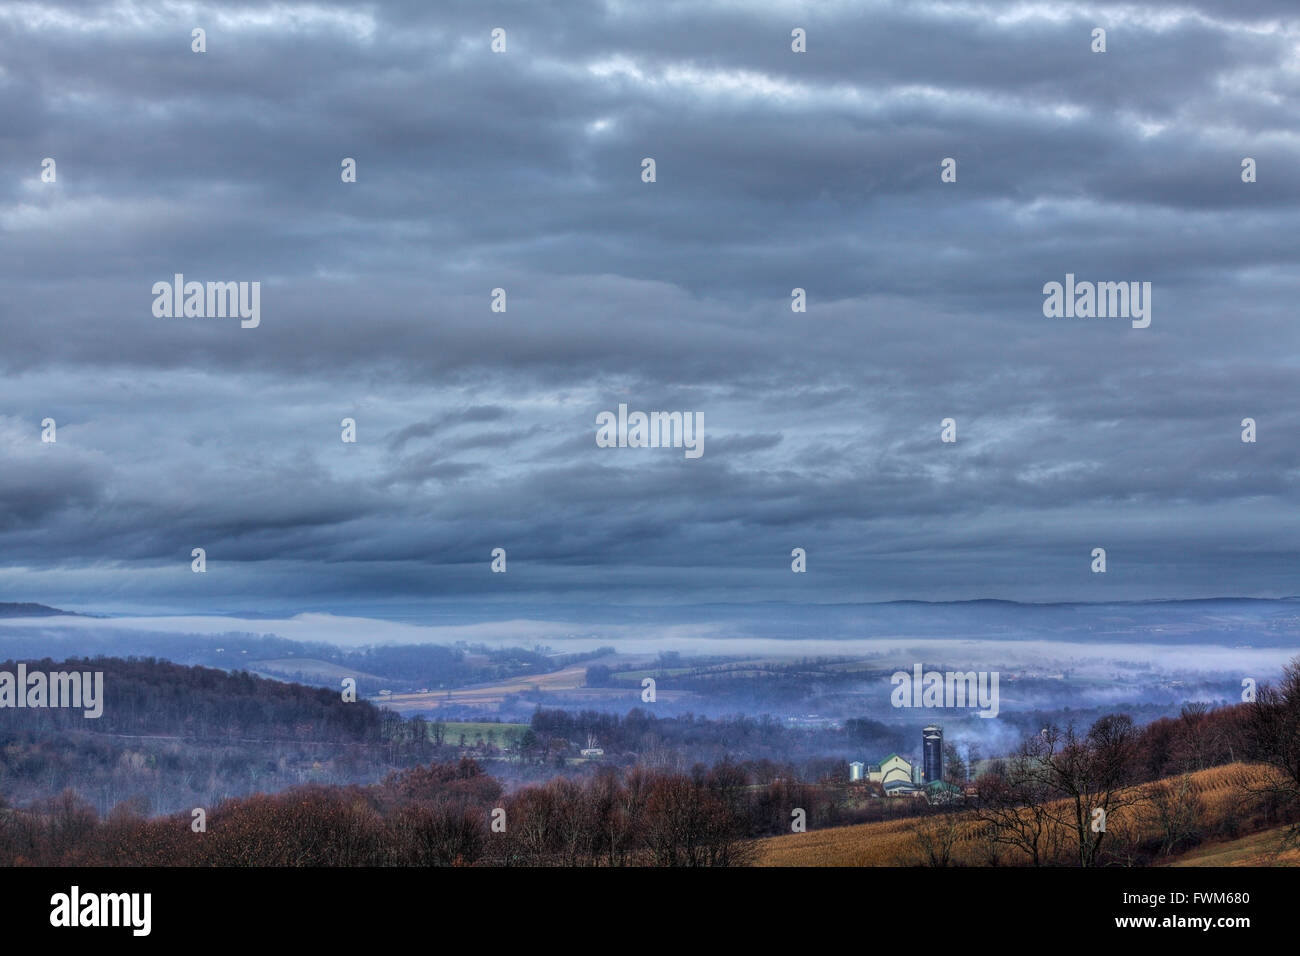 Fog covers Mohawk Valley, Herkimer County, upstate New York, USA Stock Photo